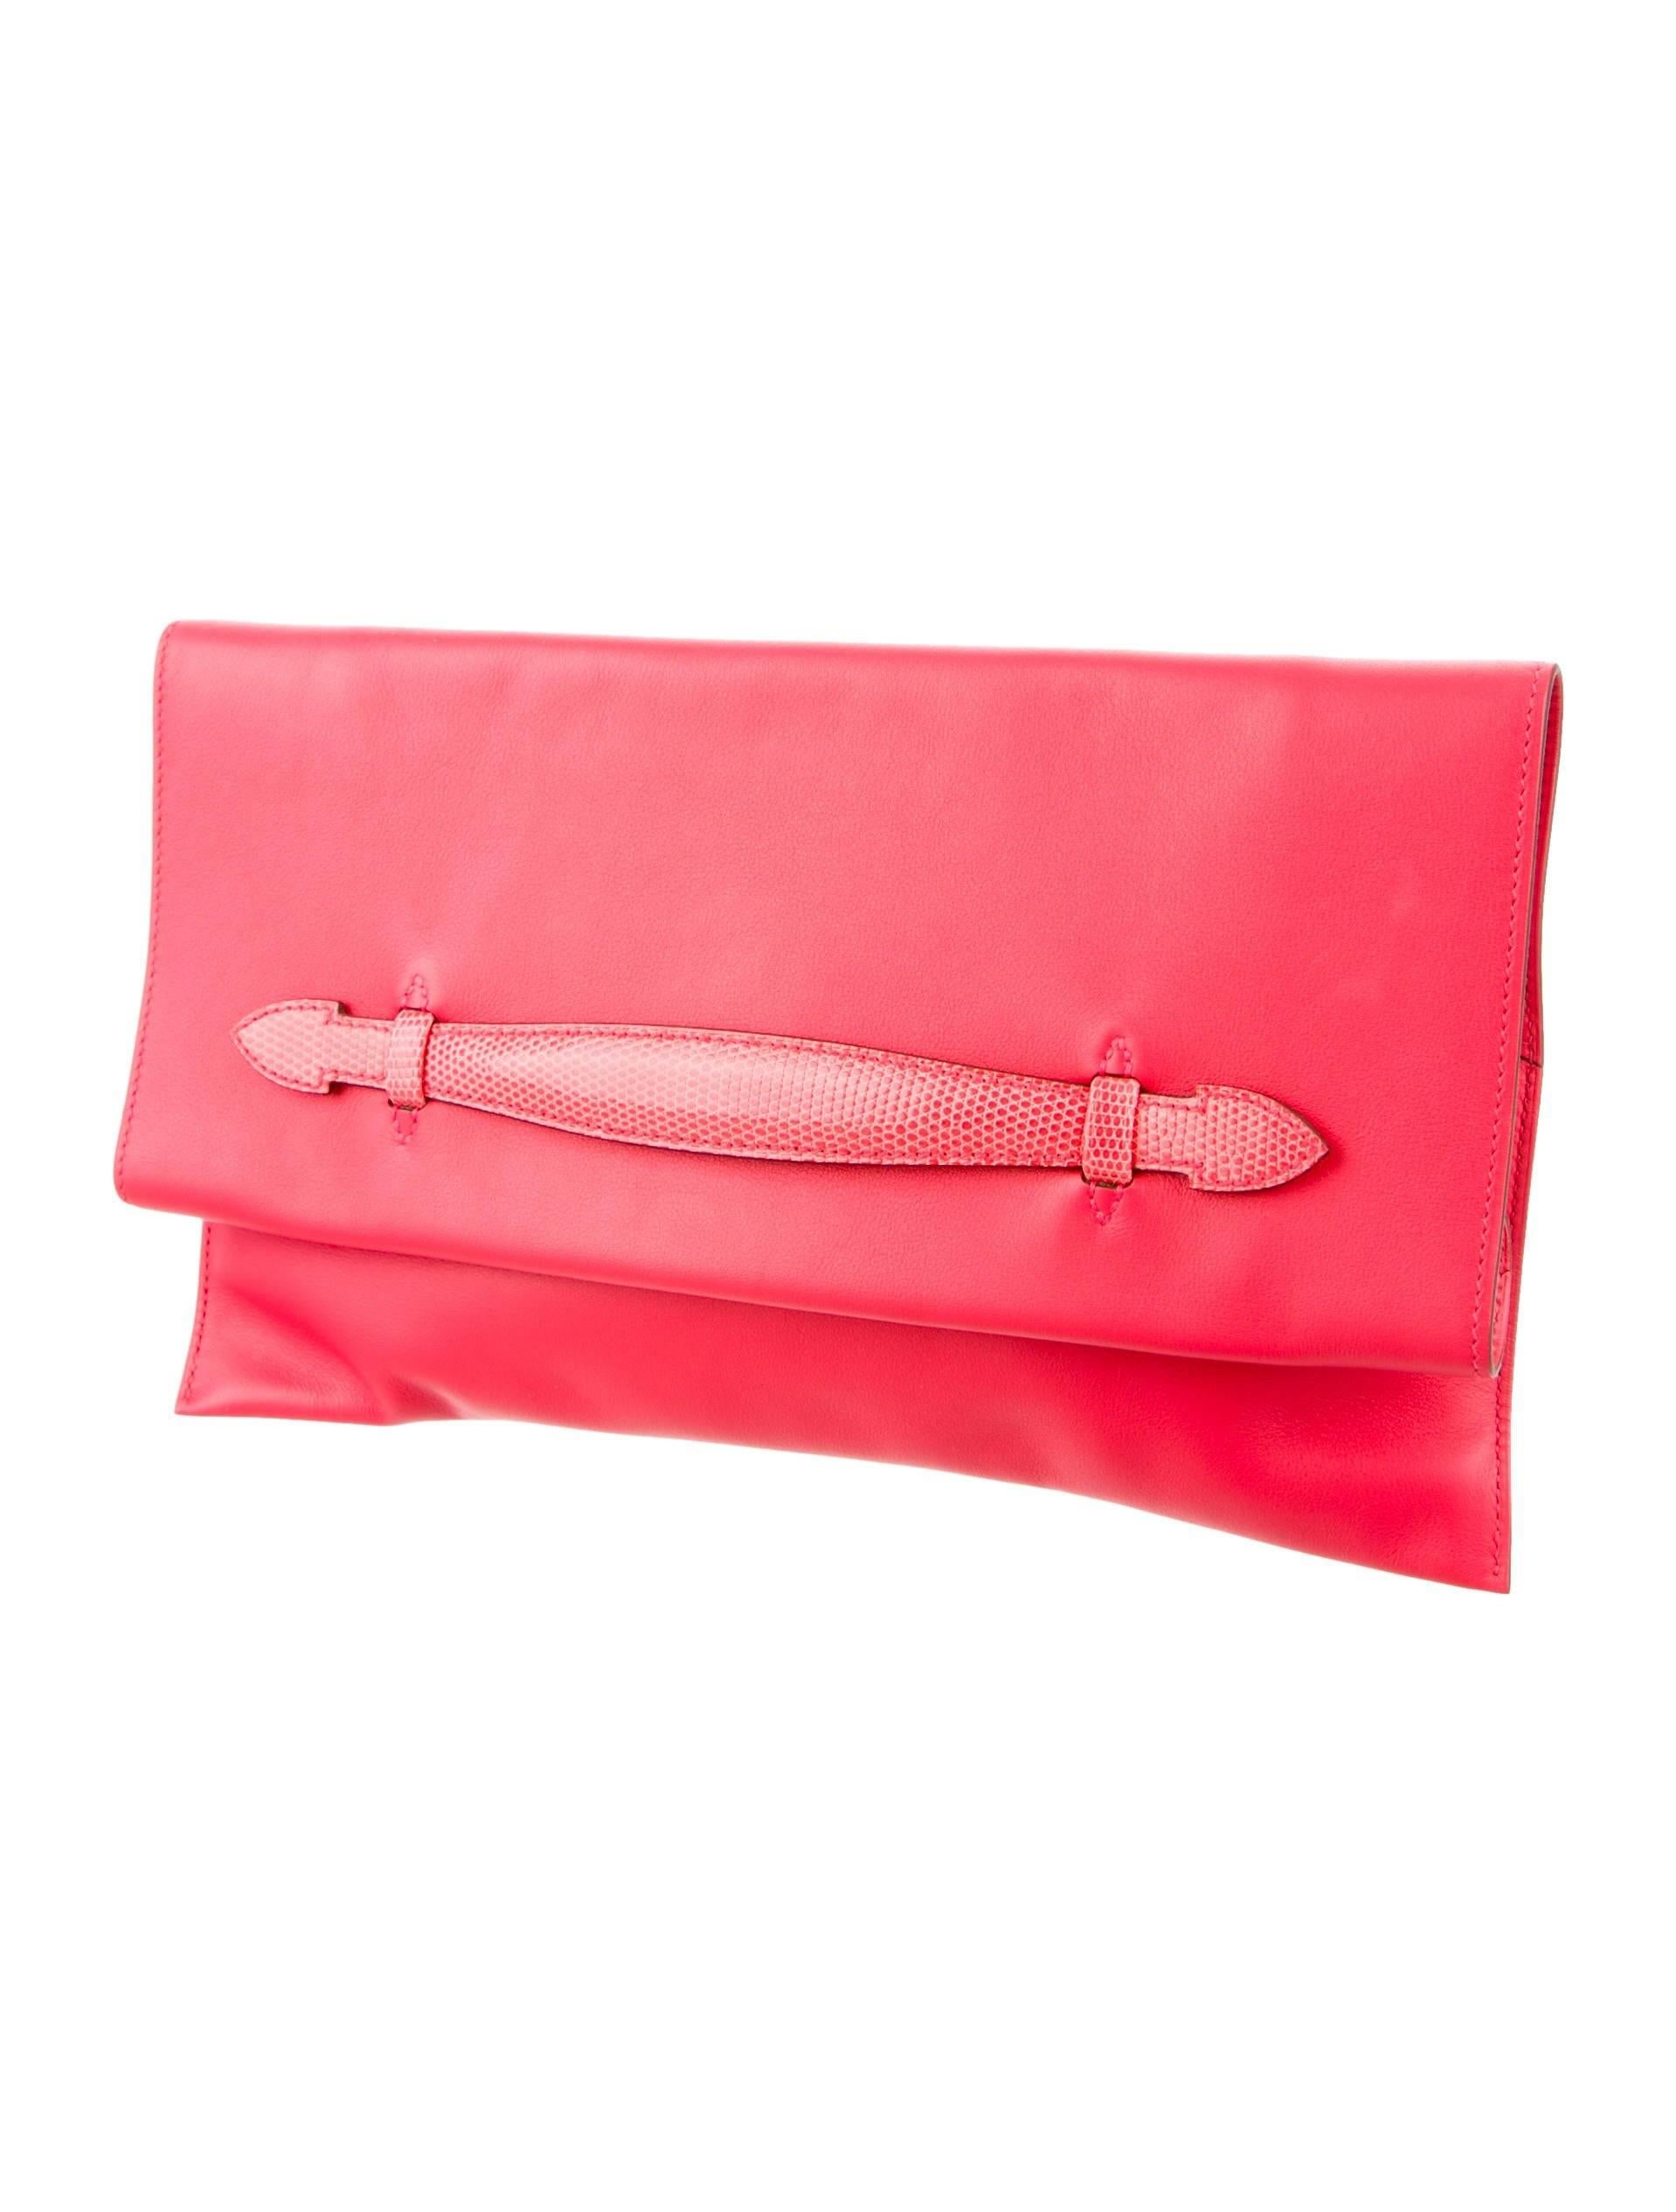 Red Hermes Leather Lizard Exotic Leather Fold Over Envelope Evening Clutch Flap Bag